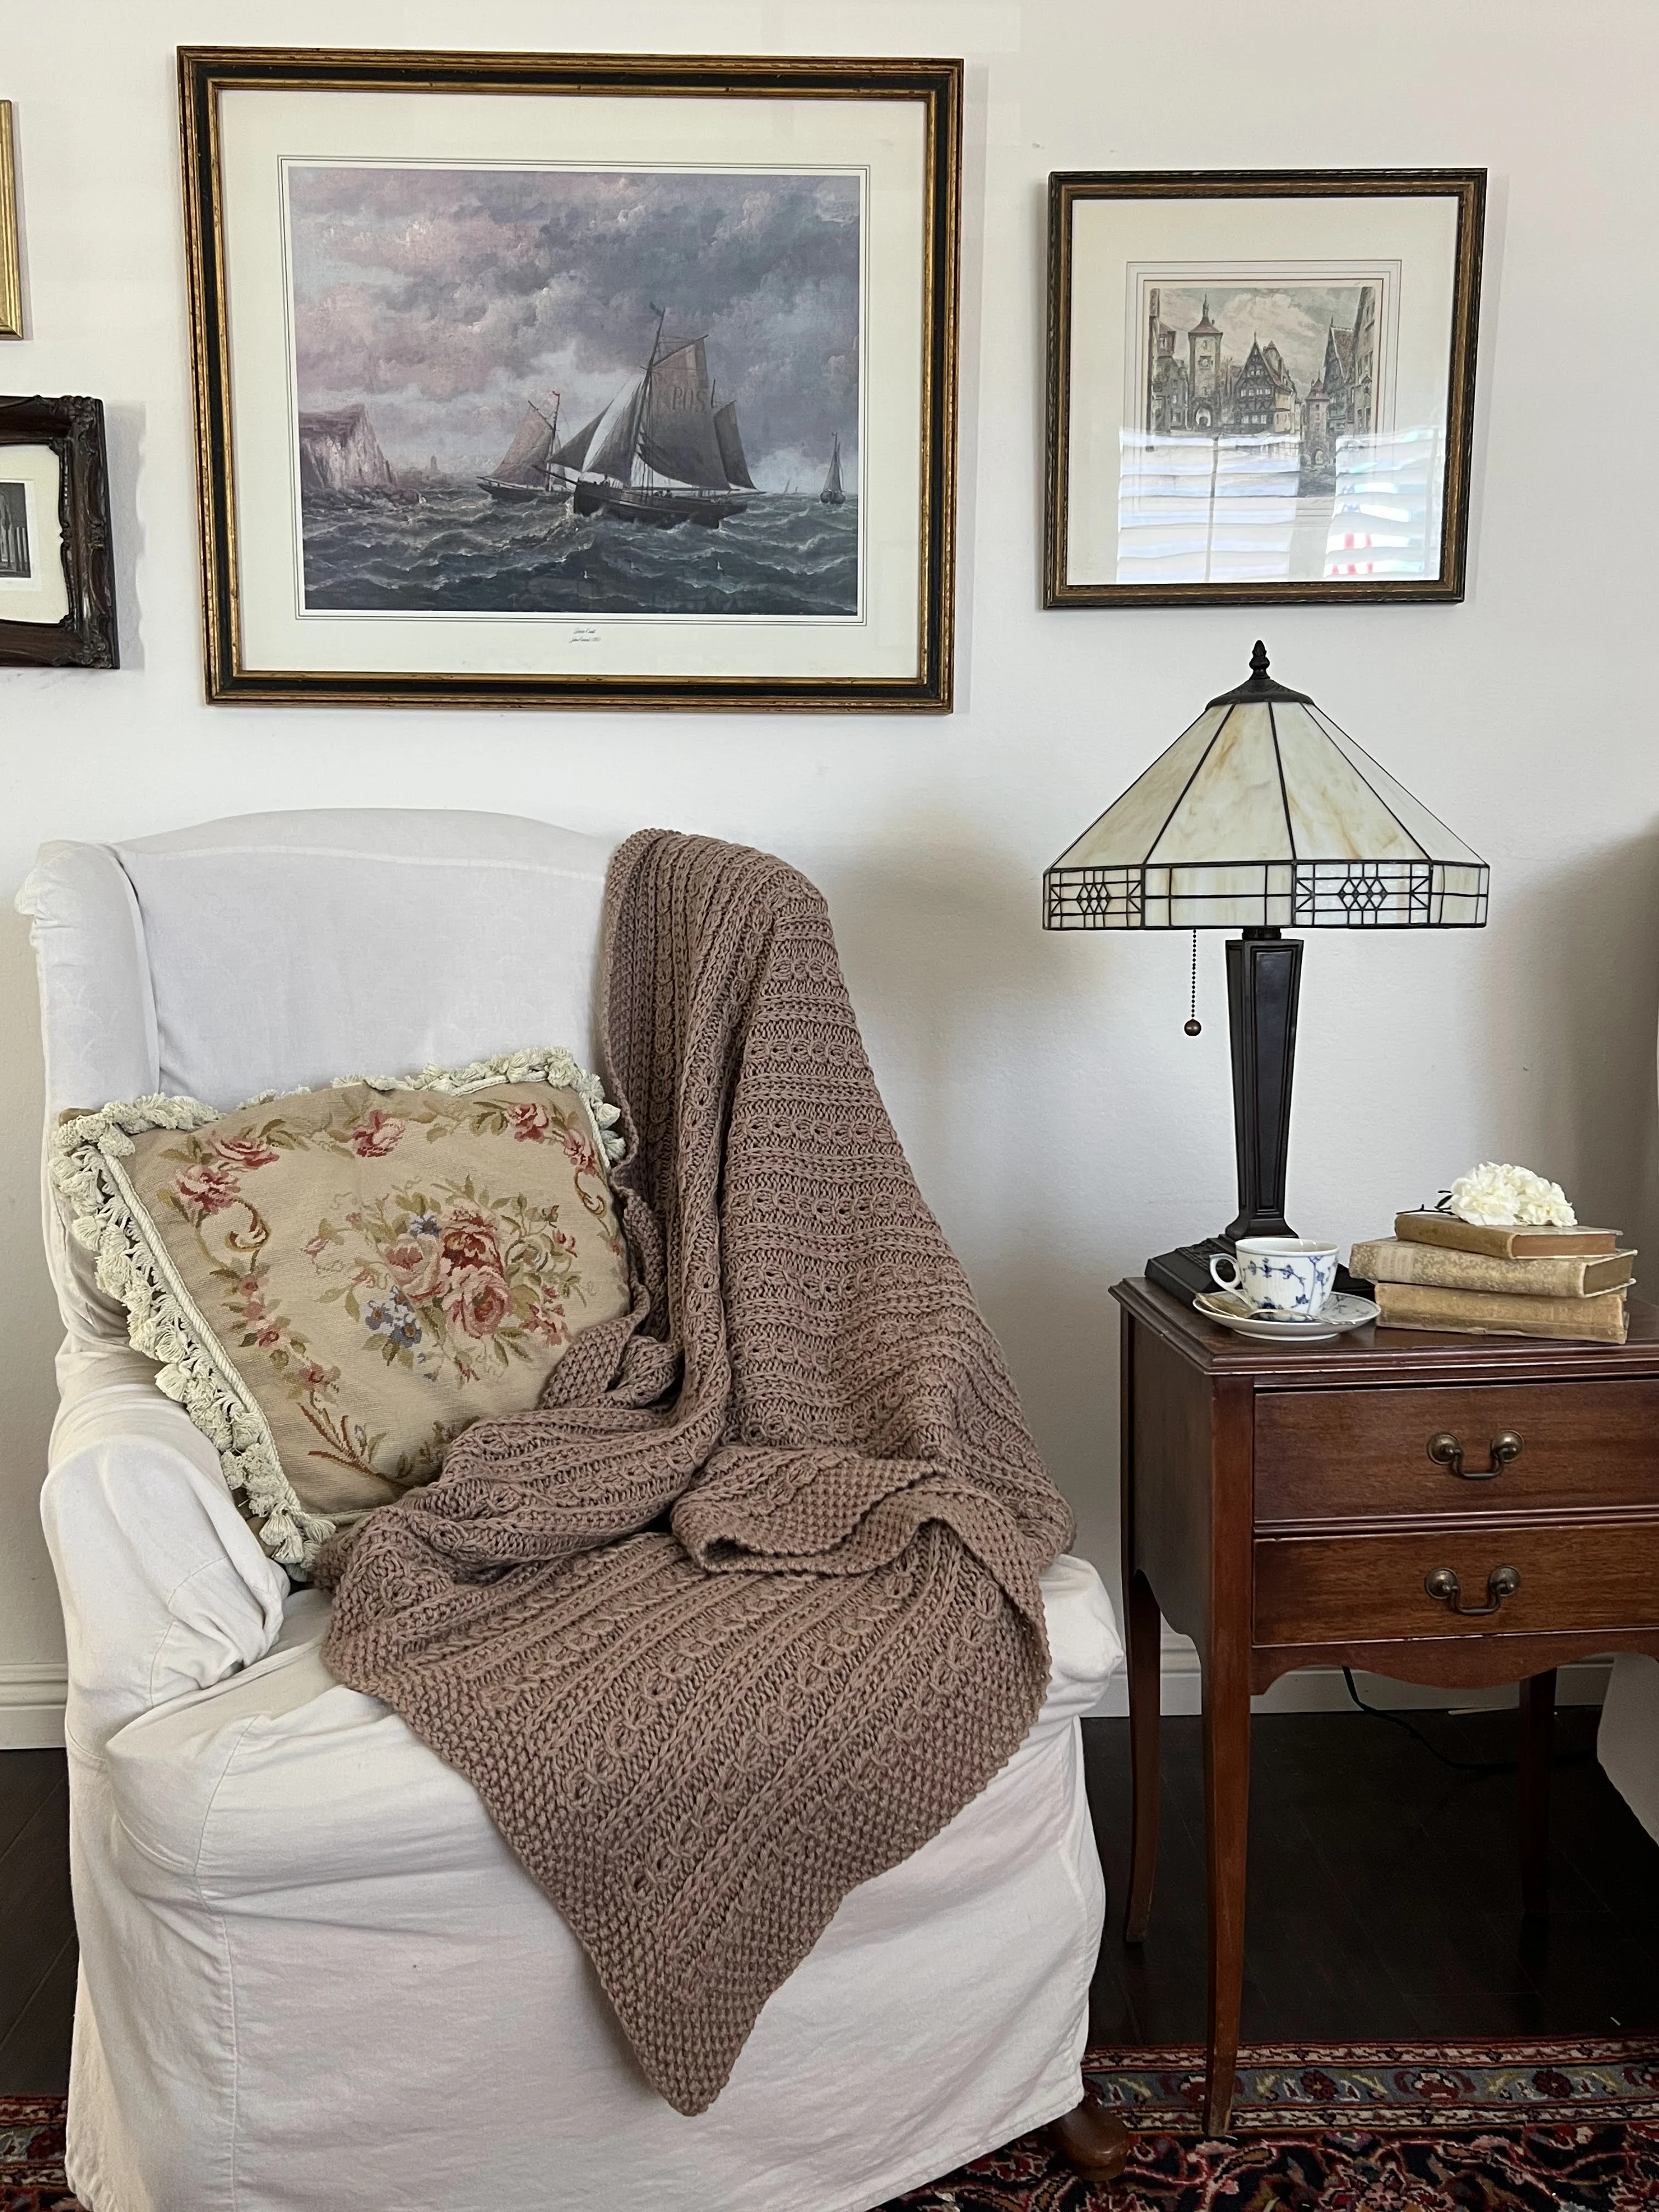 A zoomed out image of the Catalina Eddy Blanket draped across the side and seat of a wing-back chair. Also in the image are an antique table, a glass-shaded lamp, and antique prints on the wall.